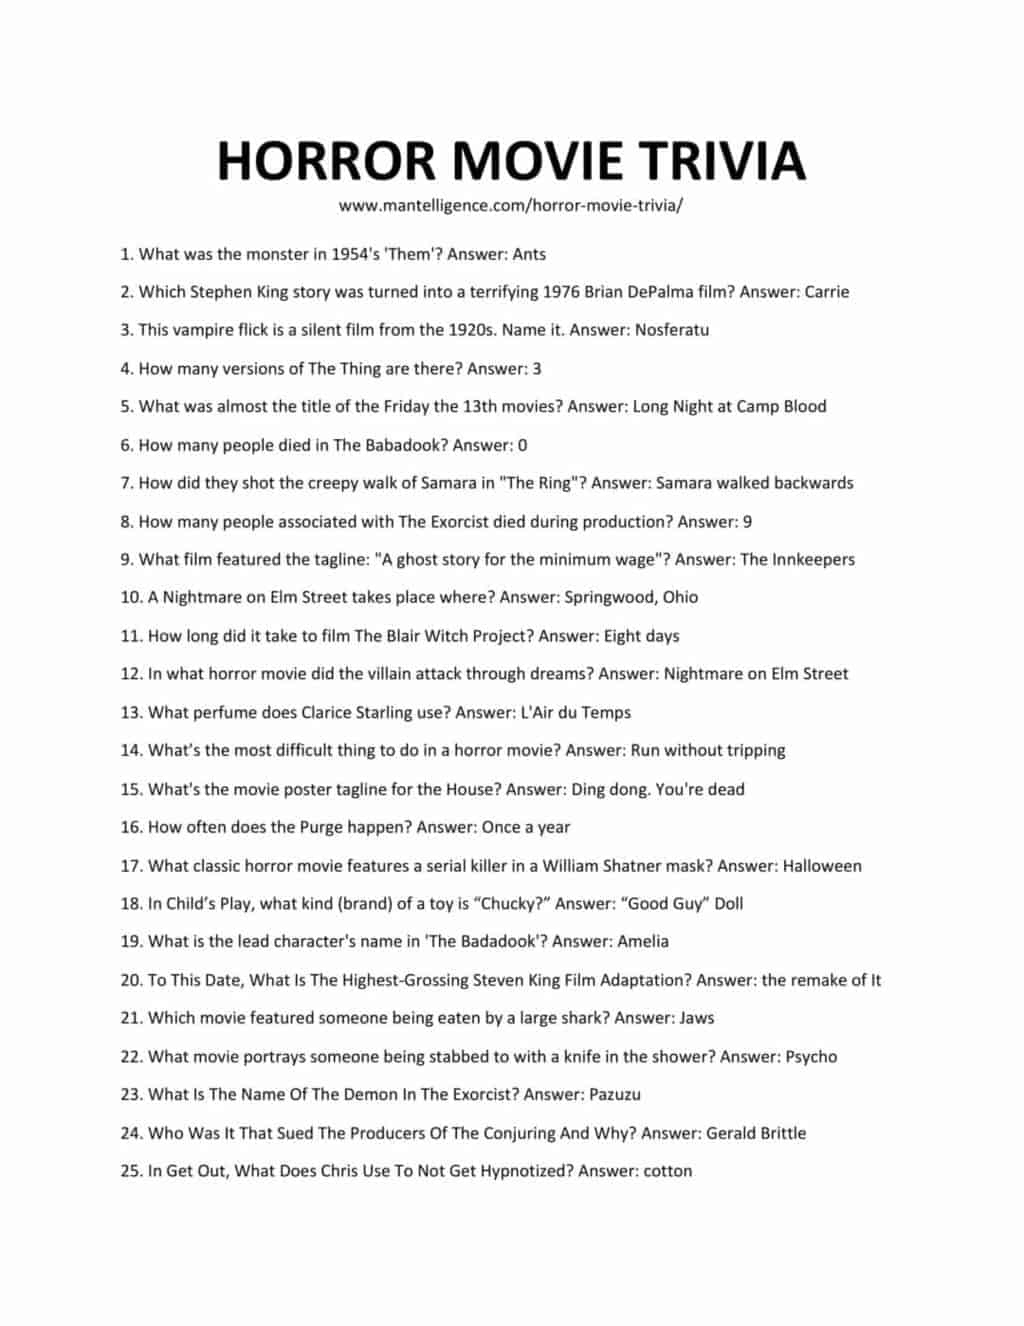 Horror Movies Trivia Questions And Answers